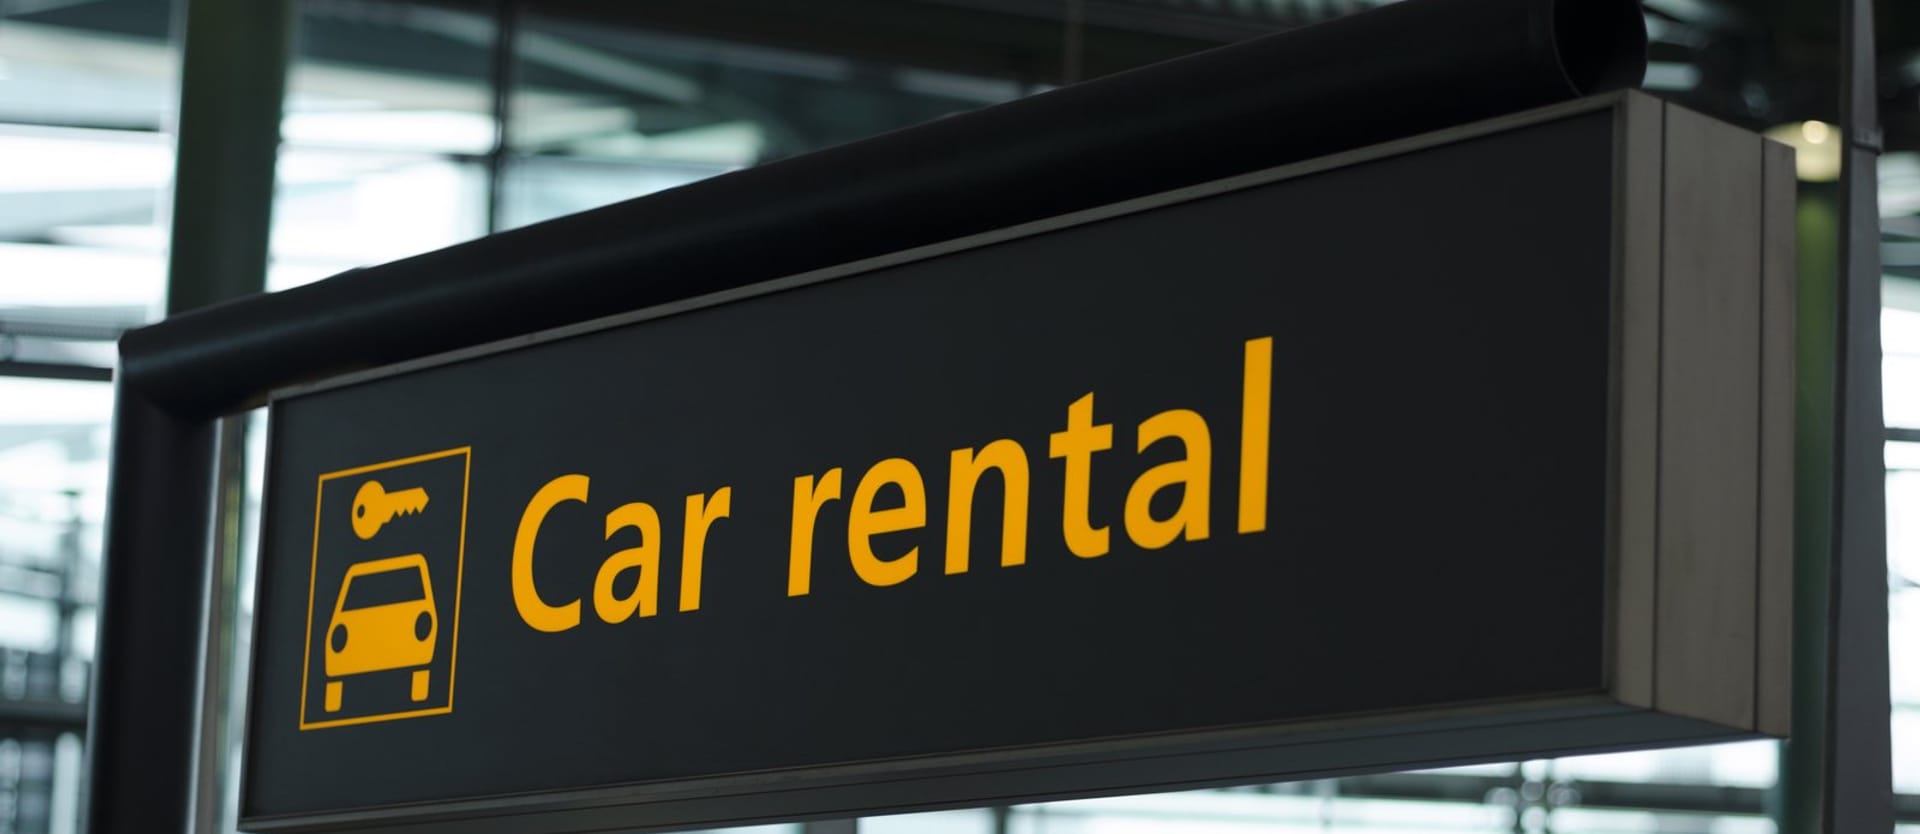 Now Rent a Car Easily at an Affordable Price